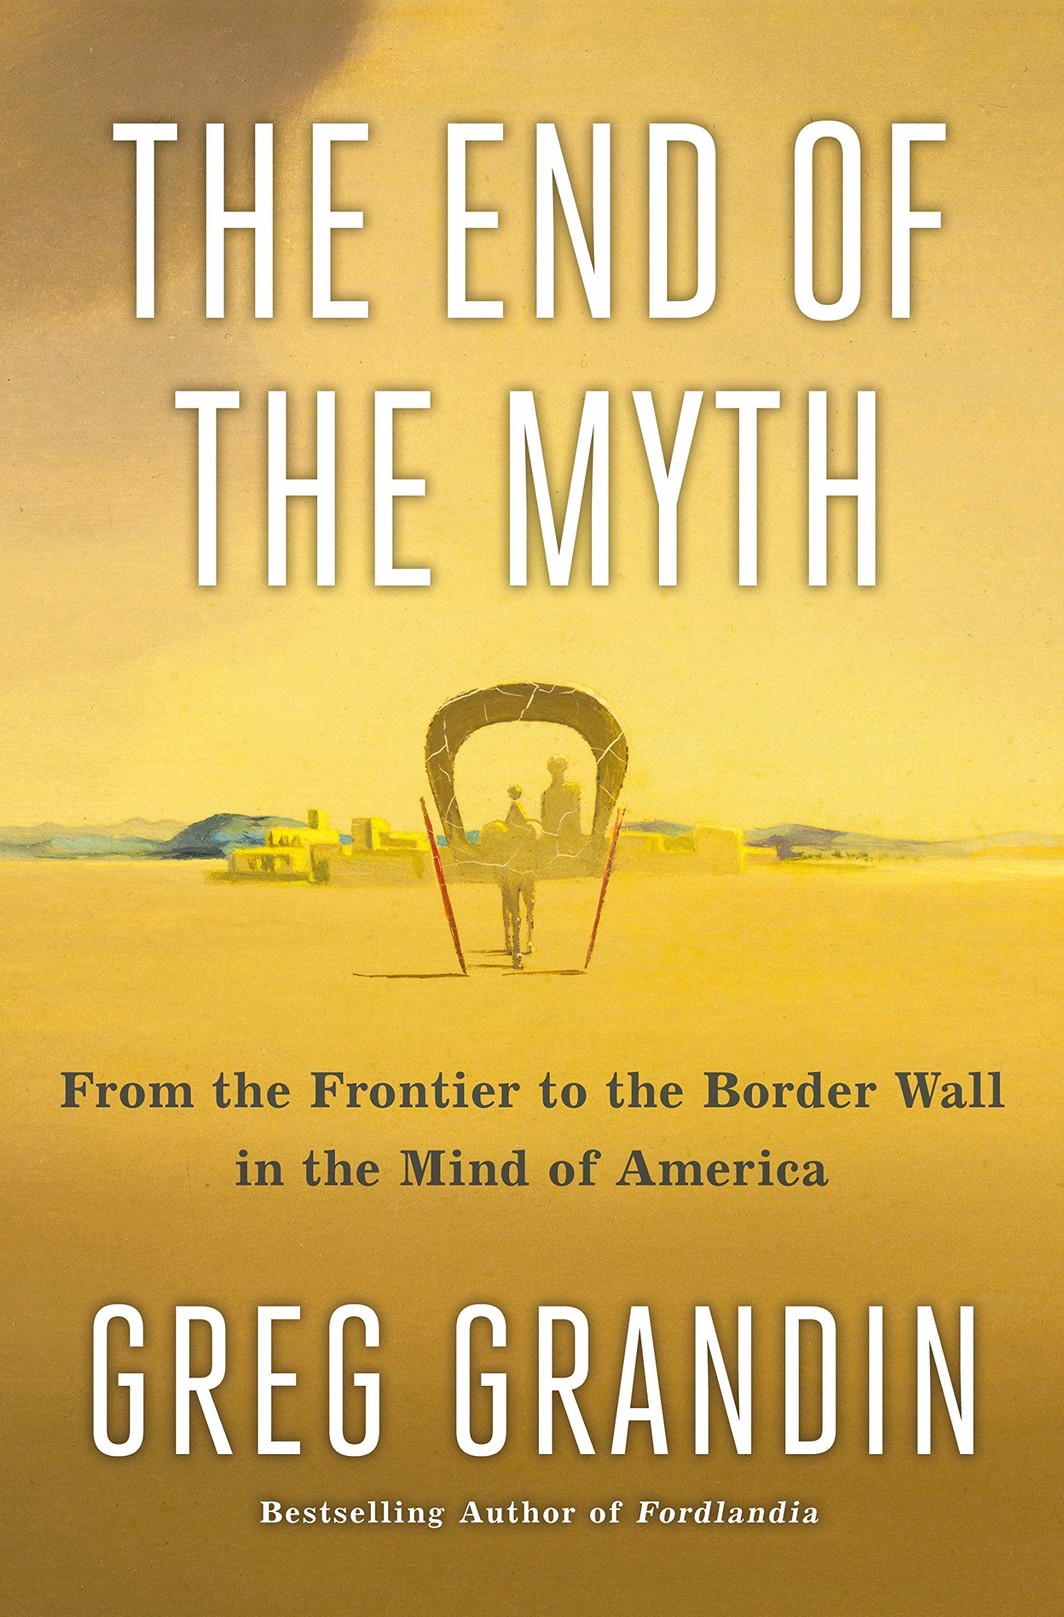 The cover of The End of the Myth: From the Frontier to the Border Wall in the Mind of America